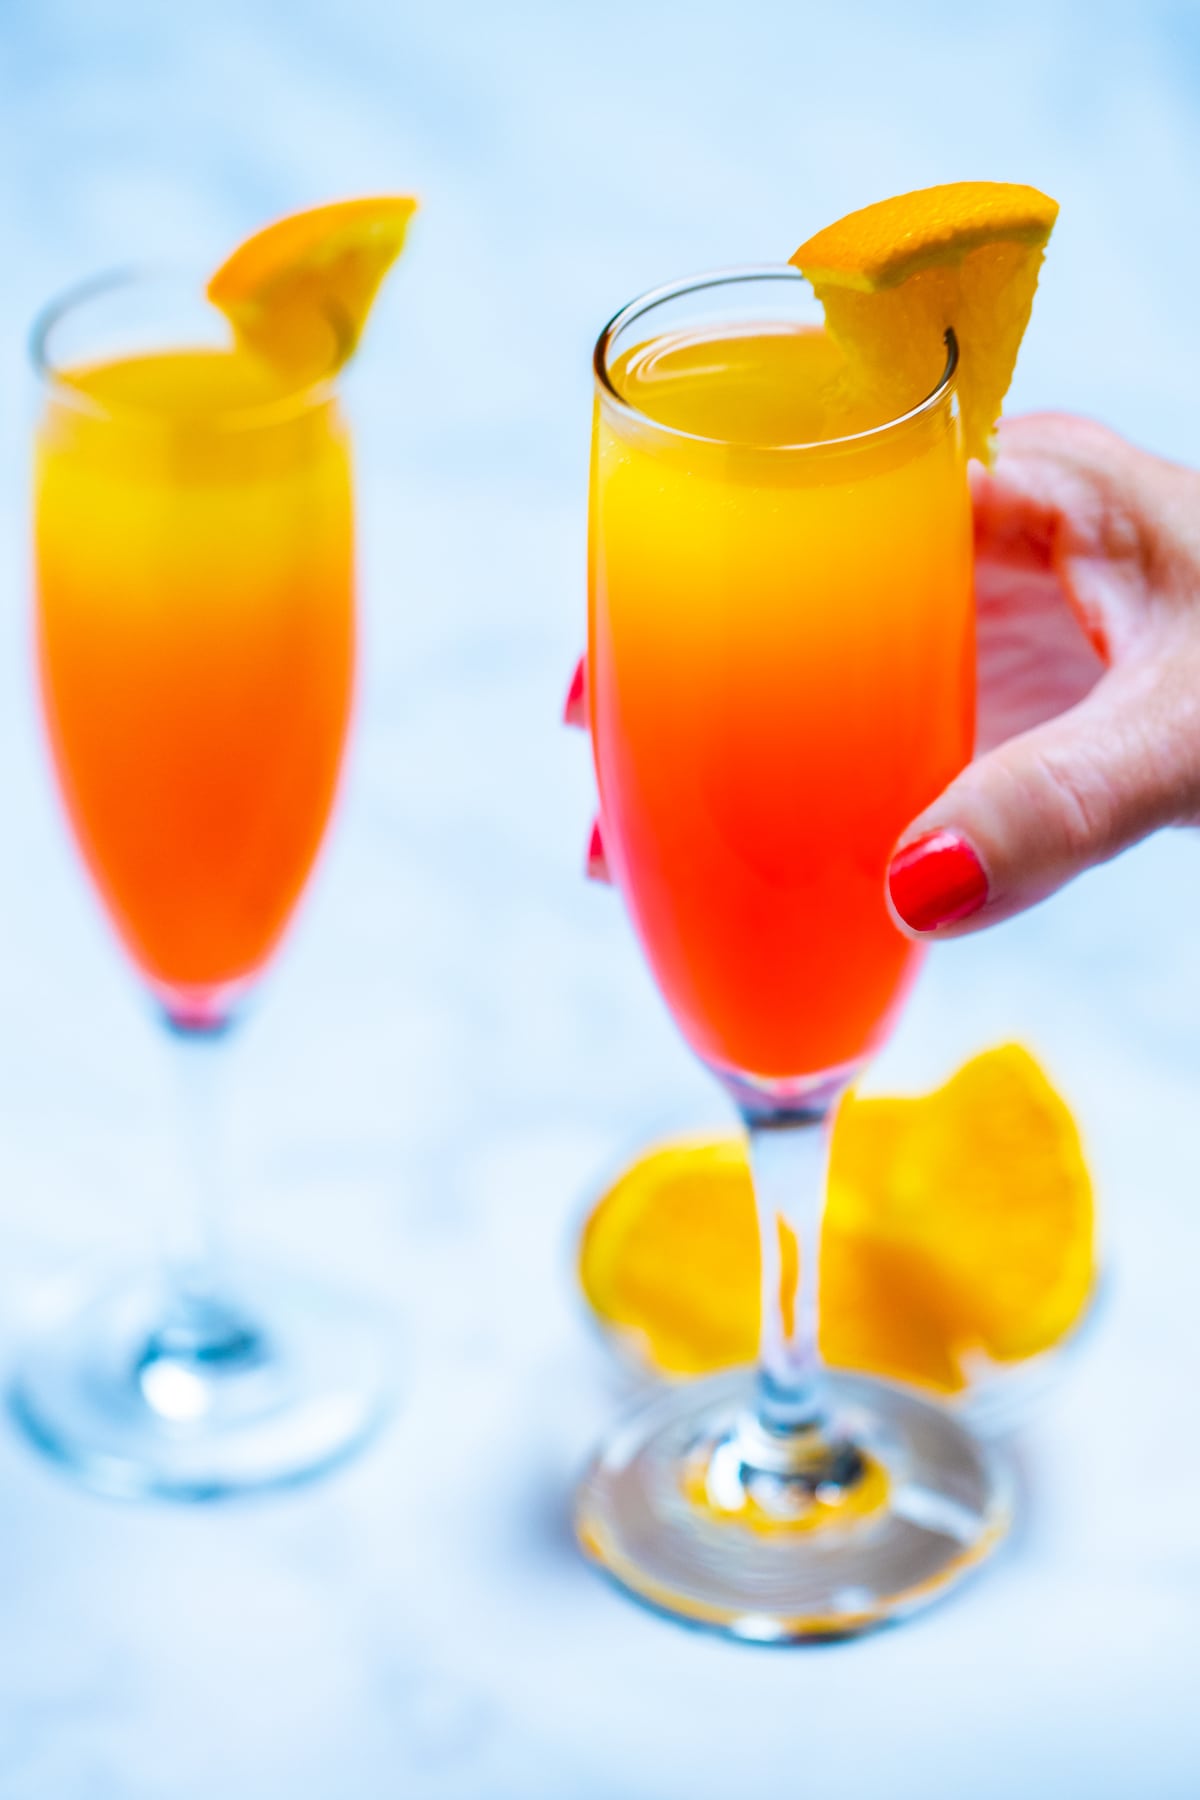 How to Make a Prosecco Mimosa (2-ingredient Prosecco Mimosa recipe)